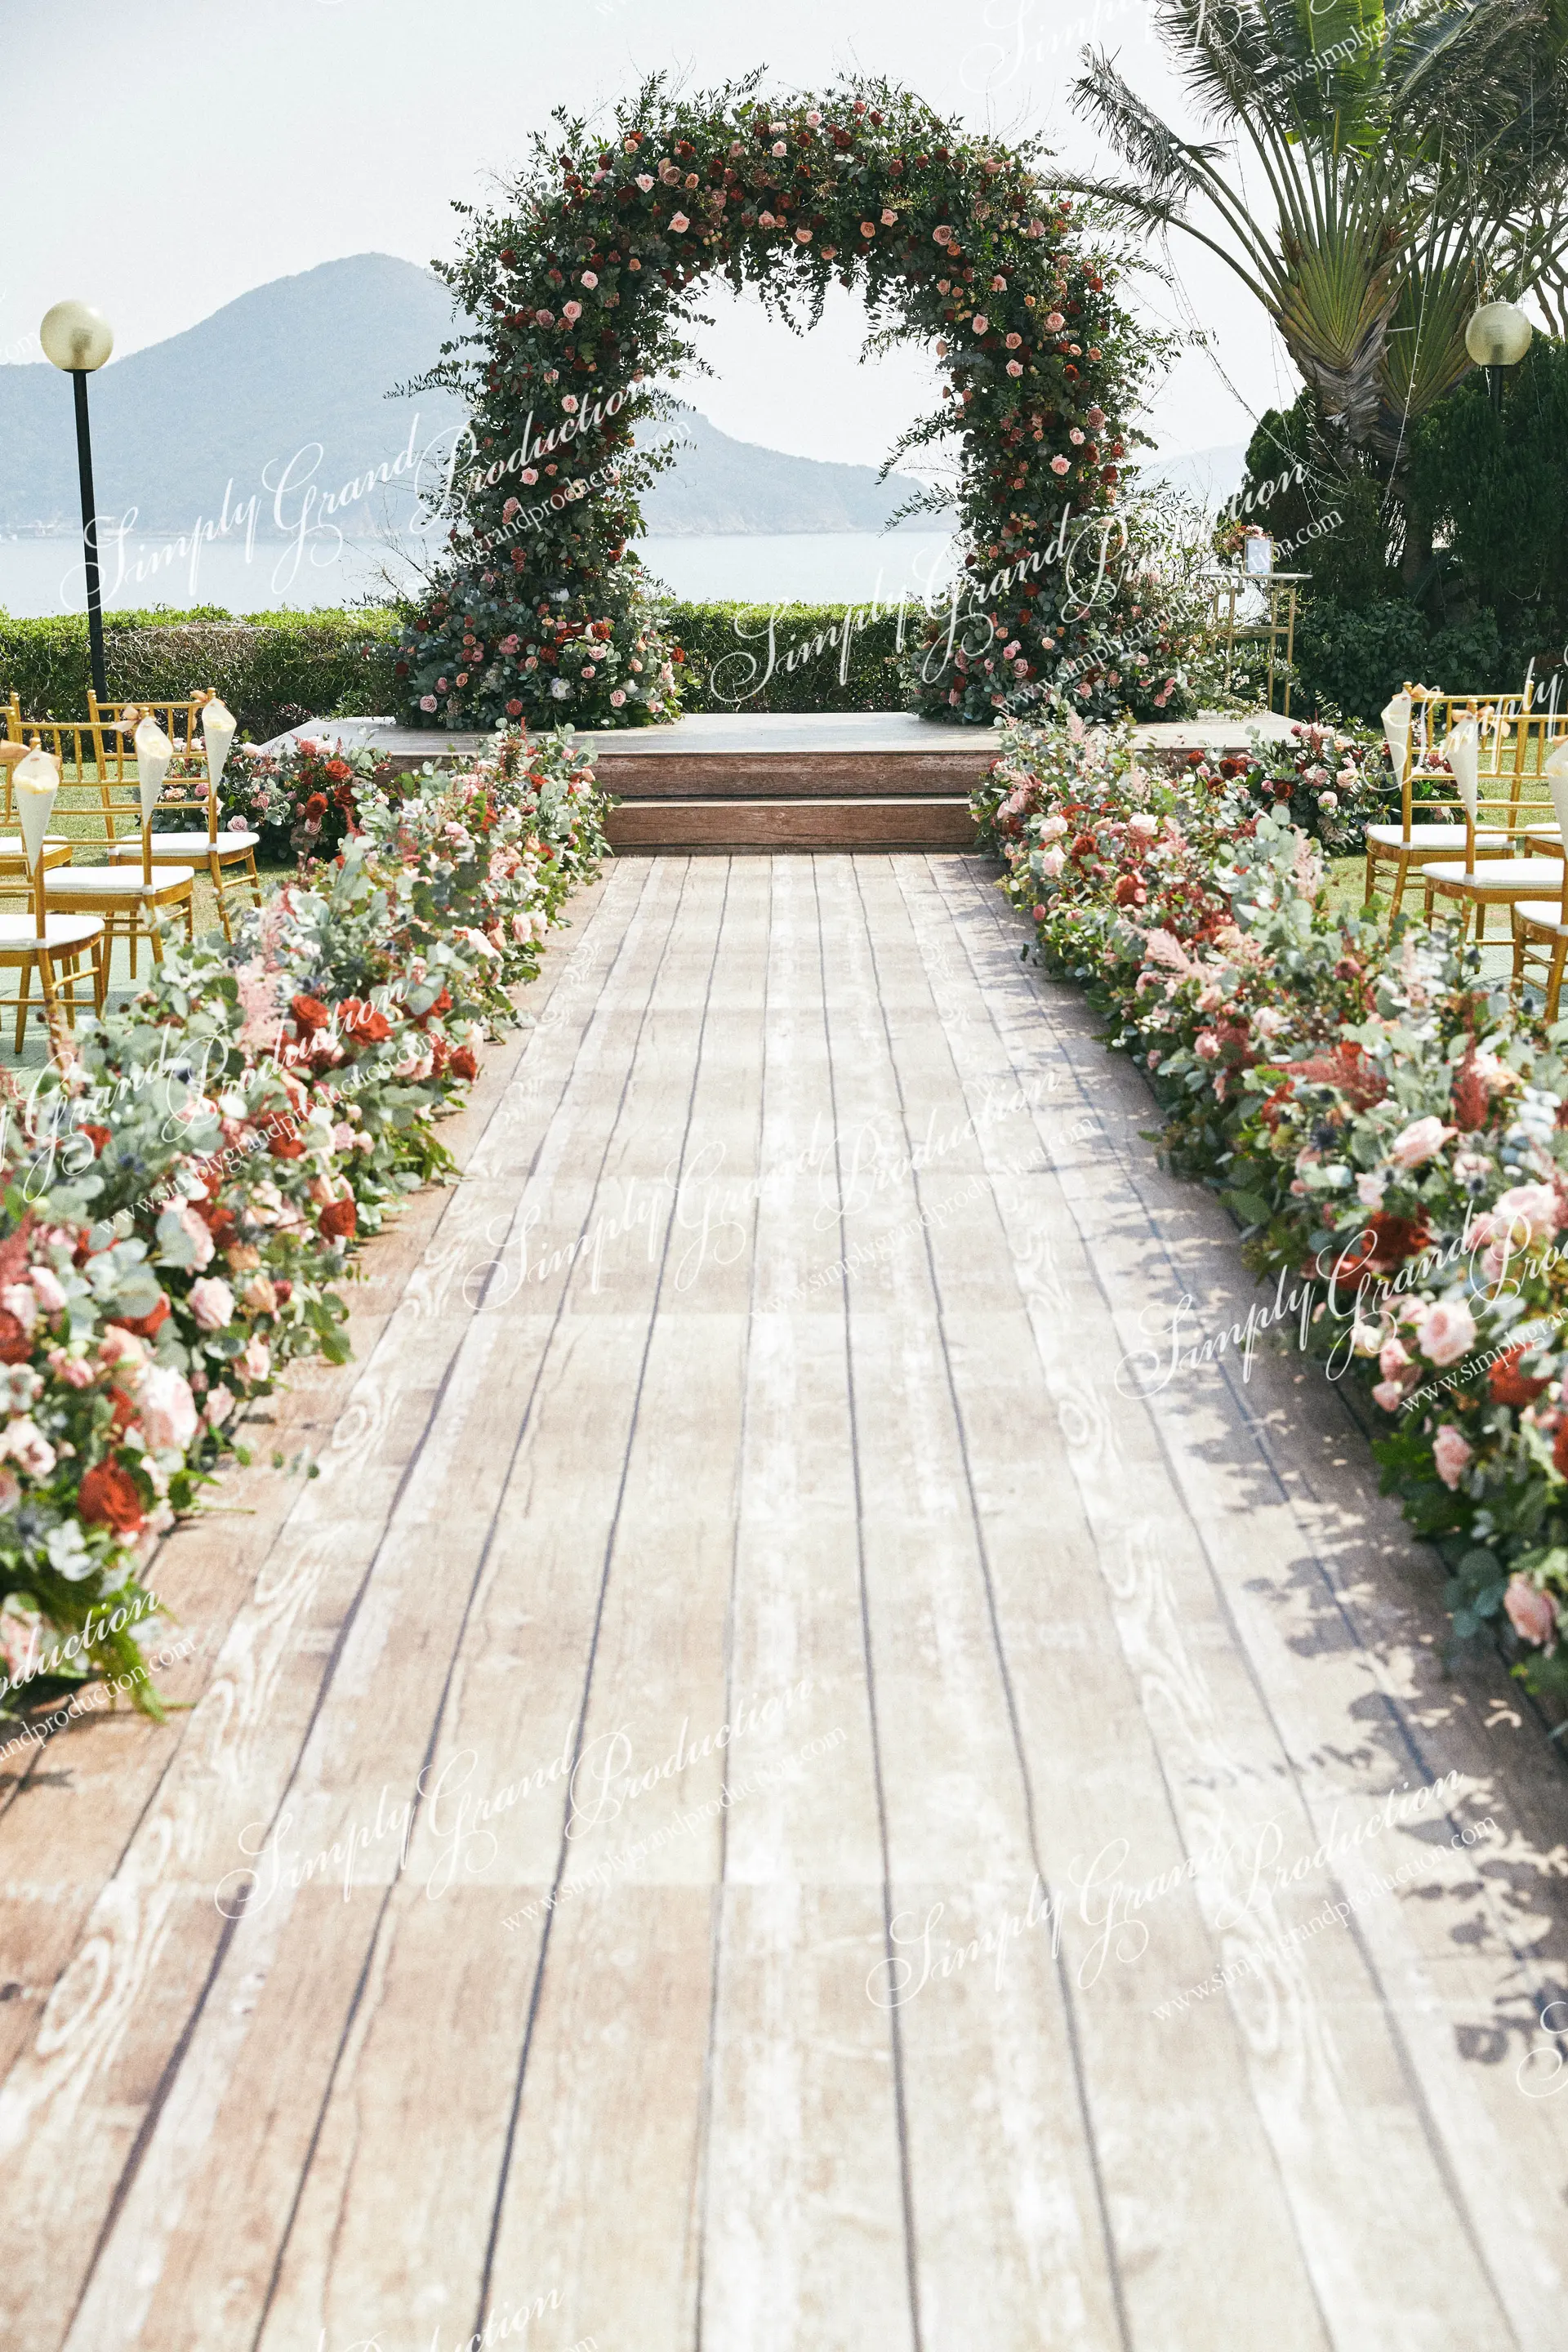 Simply_Grand_Production_Outdoor_wedding_decoration_arch_seaview_Country_Club_2_11.jpg